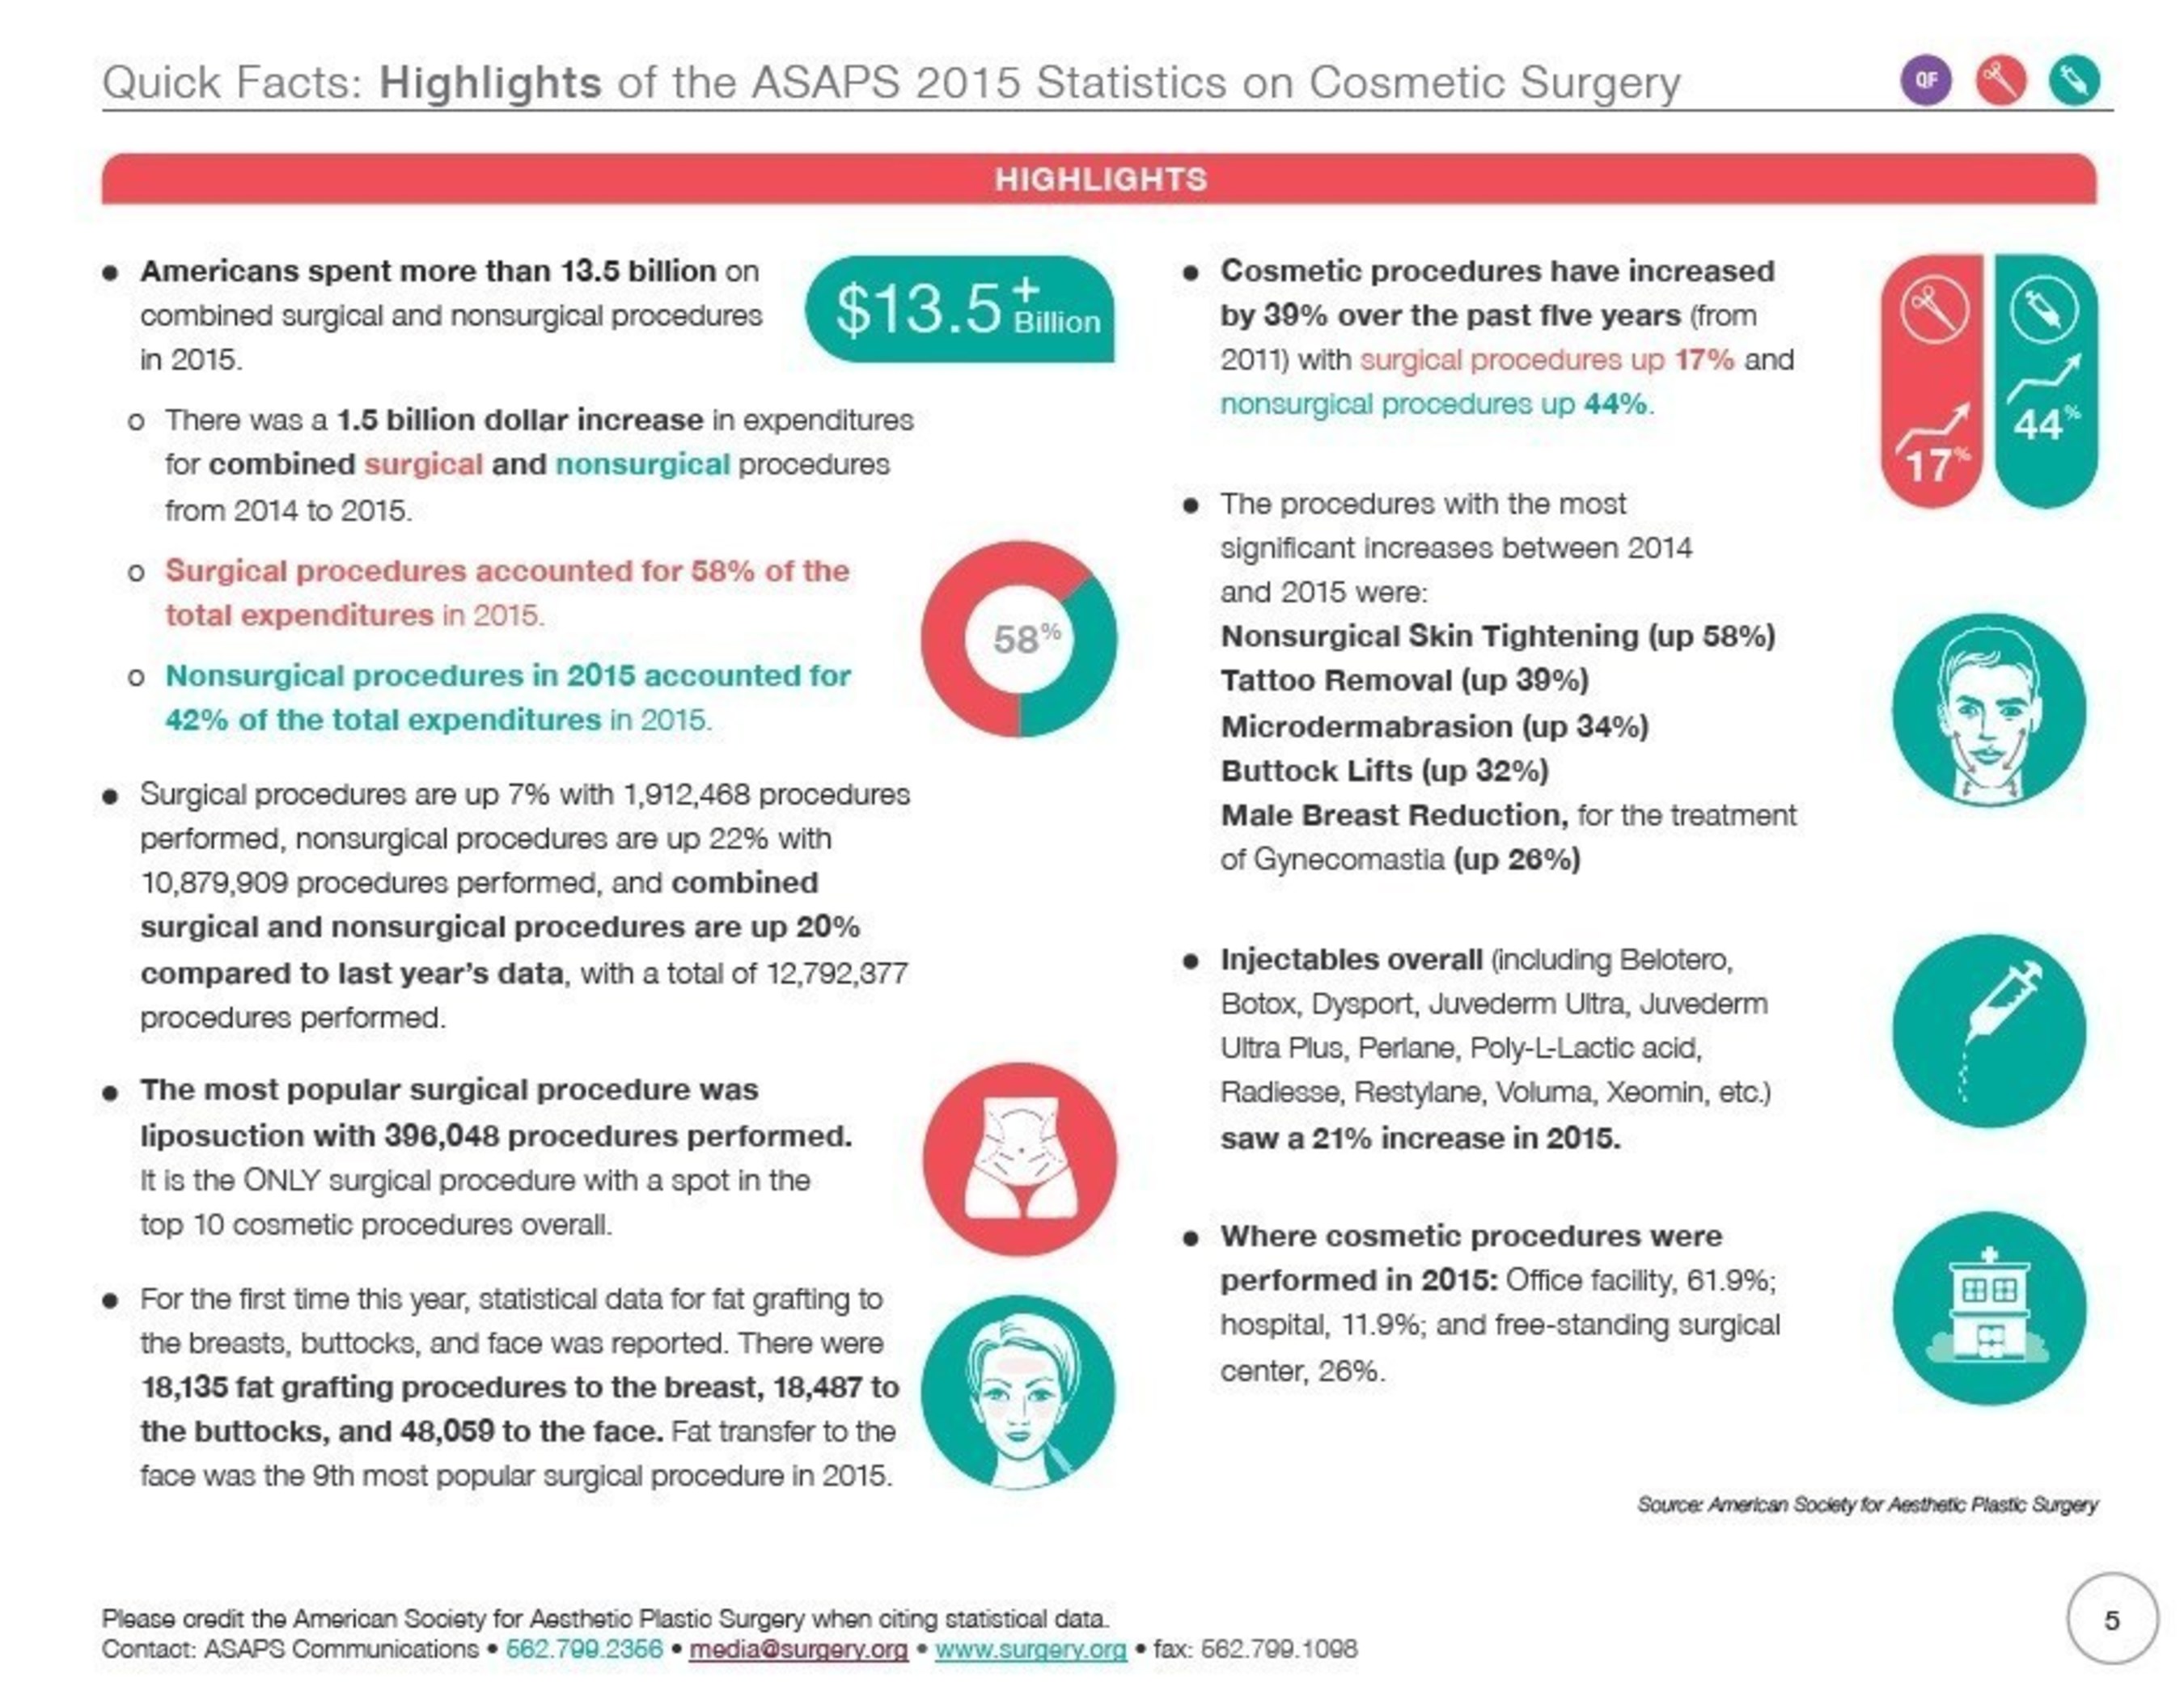 Highlights of the ASAPS 2015 Statistics on Cosmetic Surgery